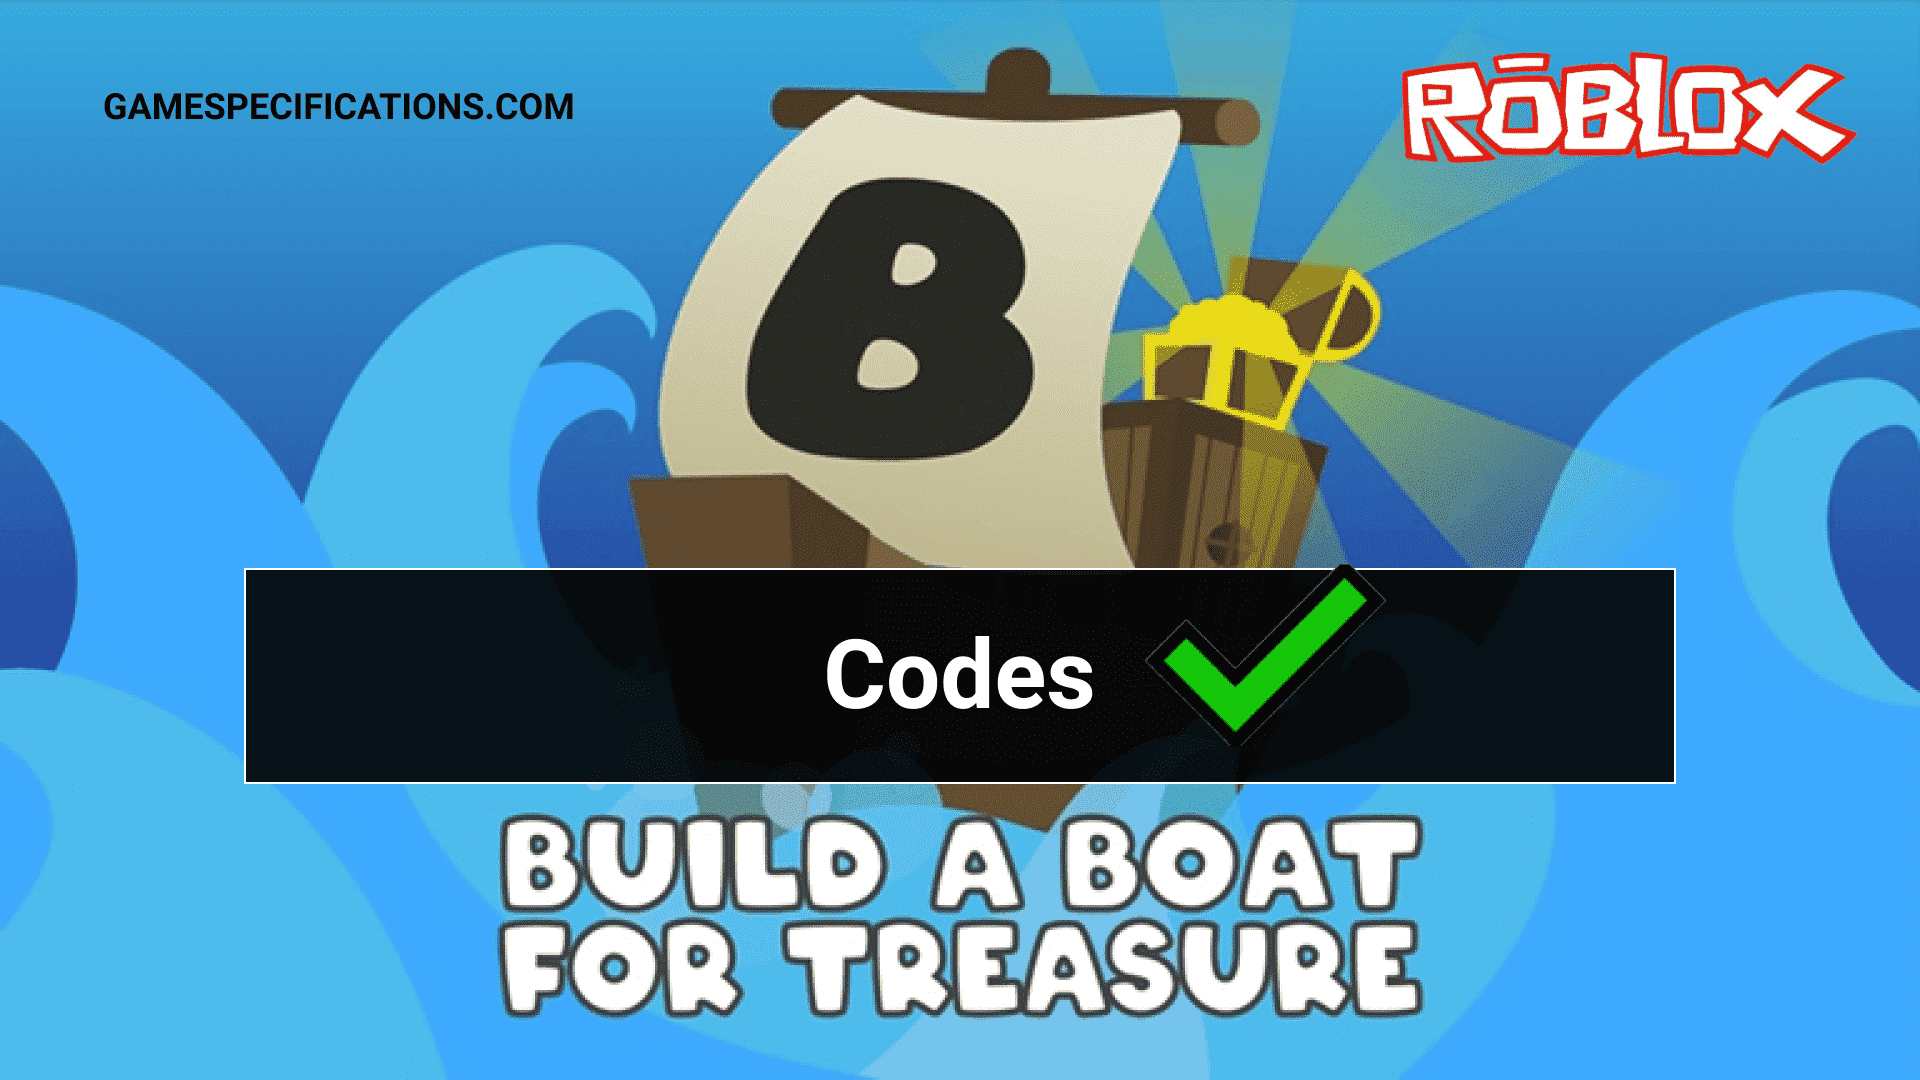 Roblox Build A Boat For Treasure Codes March 2021 Game Specifications